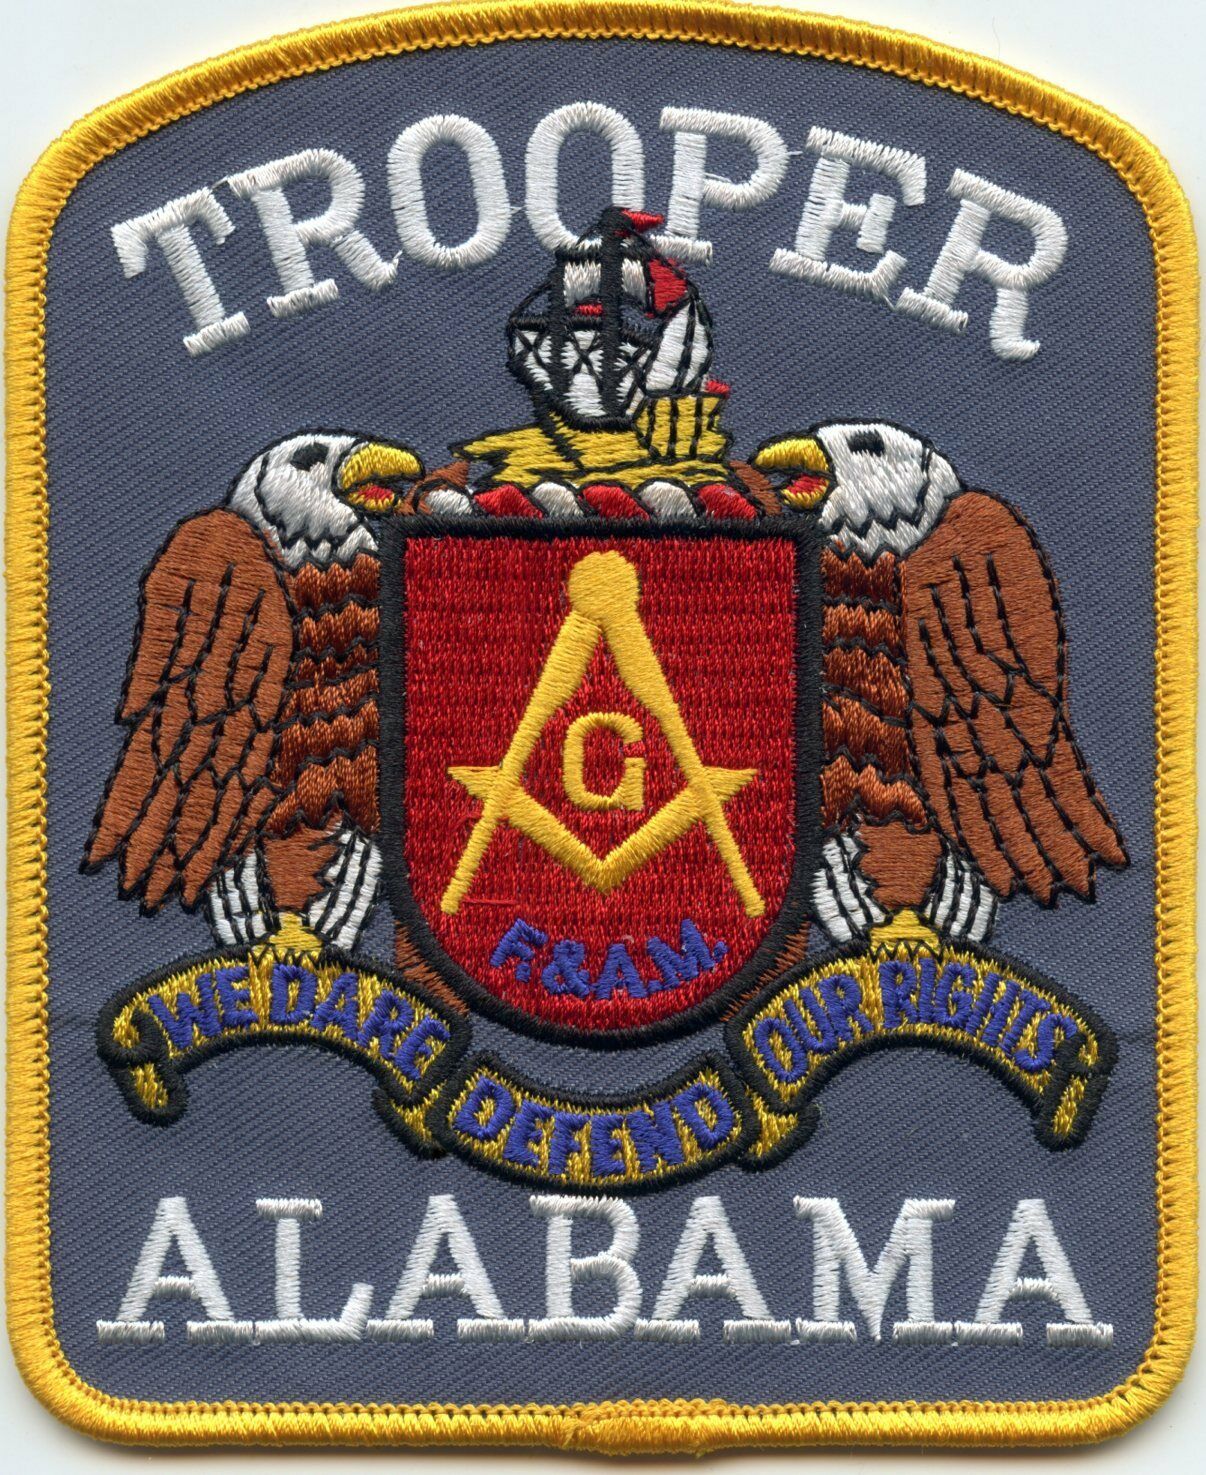 Alabama State Trooper We Dare Defend Our Rights Masonic Lodge Police Patch